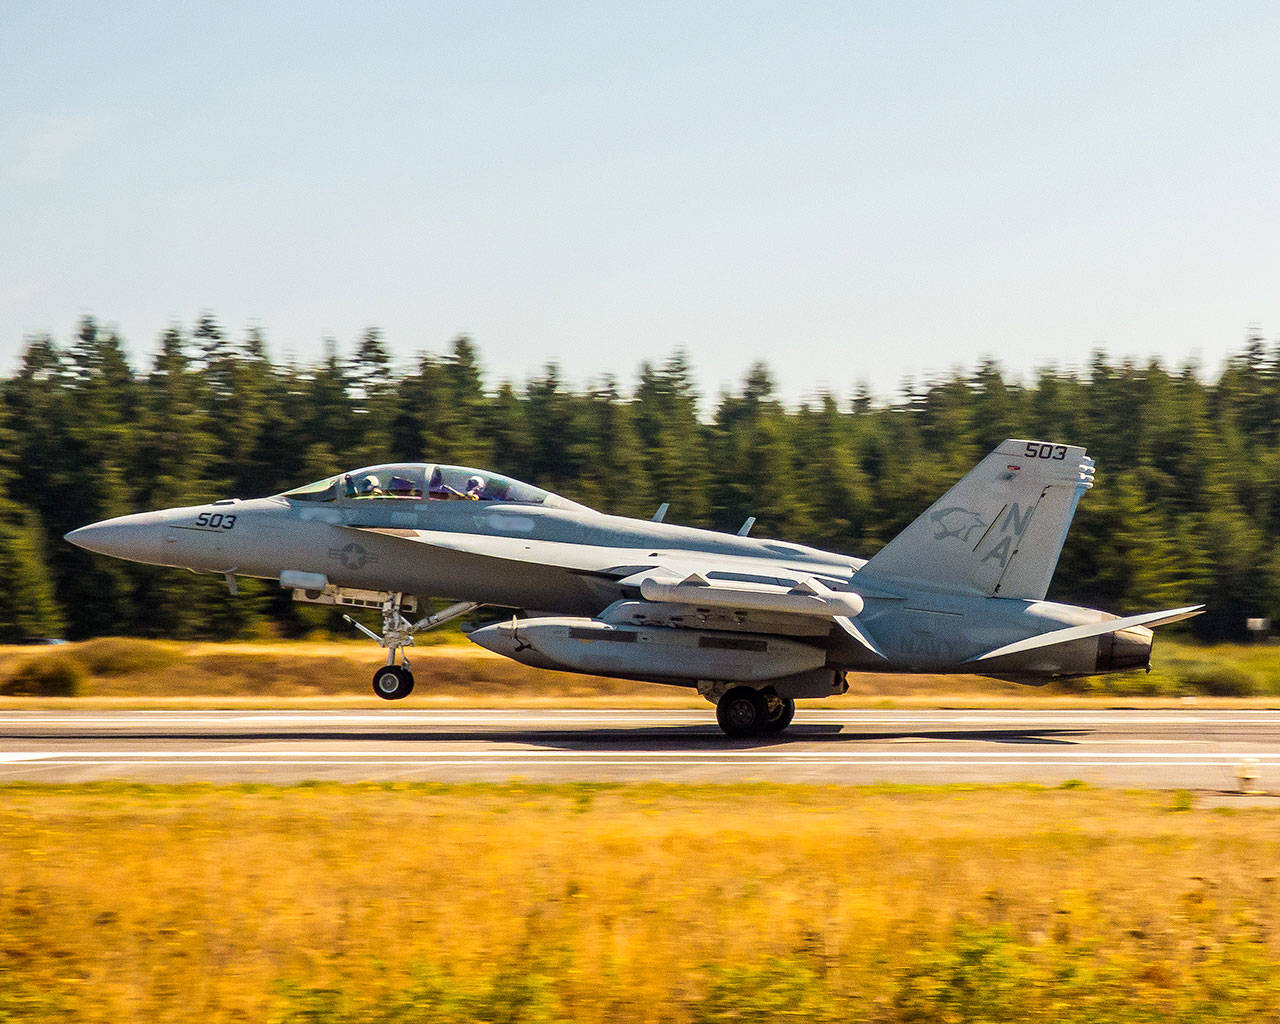 An EA-18G Growler pilot practices aircraft carrier landings at Outlying Field Coupeville. (U.S. Navy)